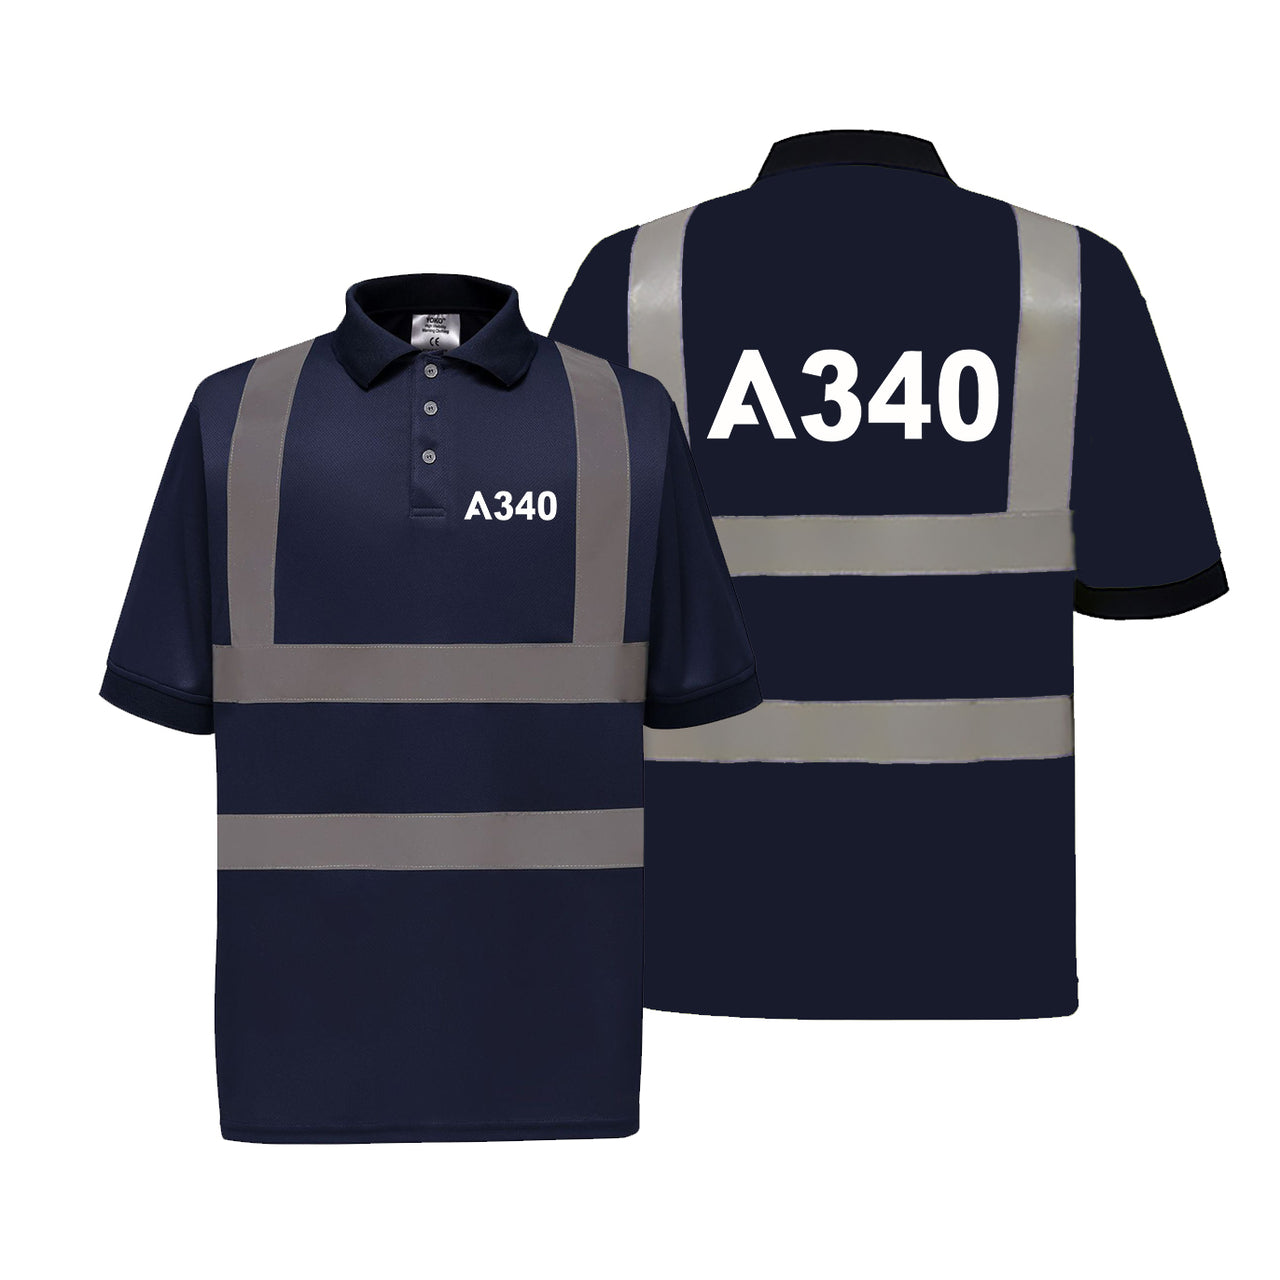 A340 Flat Text Designed Reflective Polo T-Shirts